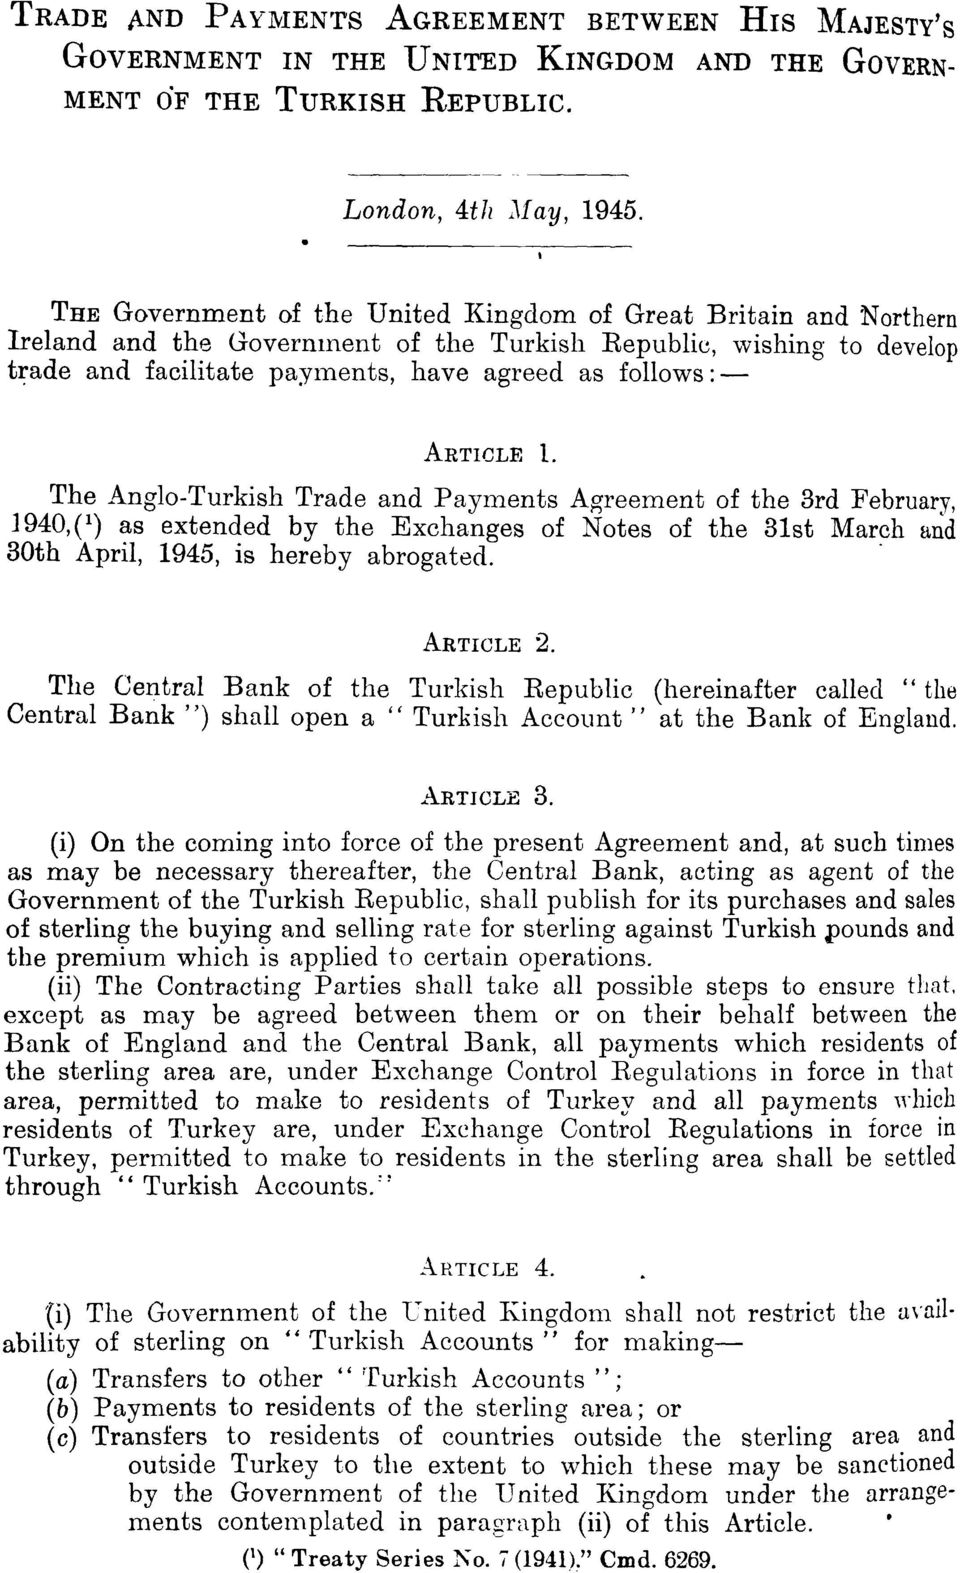 ARTICLE 1. The Anglo-Turkish Trade and Payments Agreement of the 3rd February, 1940,(1) as extended by the Exchanges of Notes of the 31st March and 30th April, 1945, is hereby abrogated. ARTICLE 2.